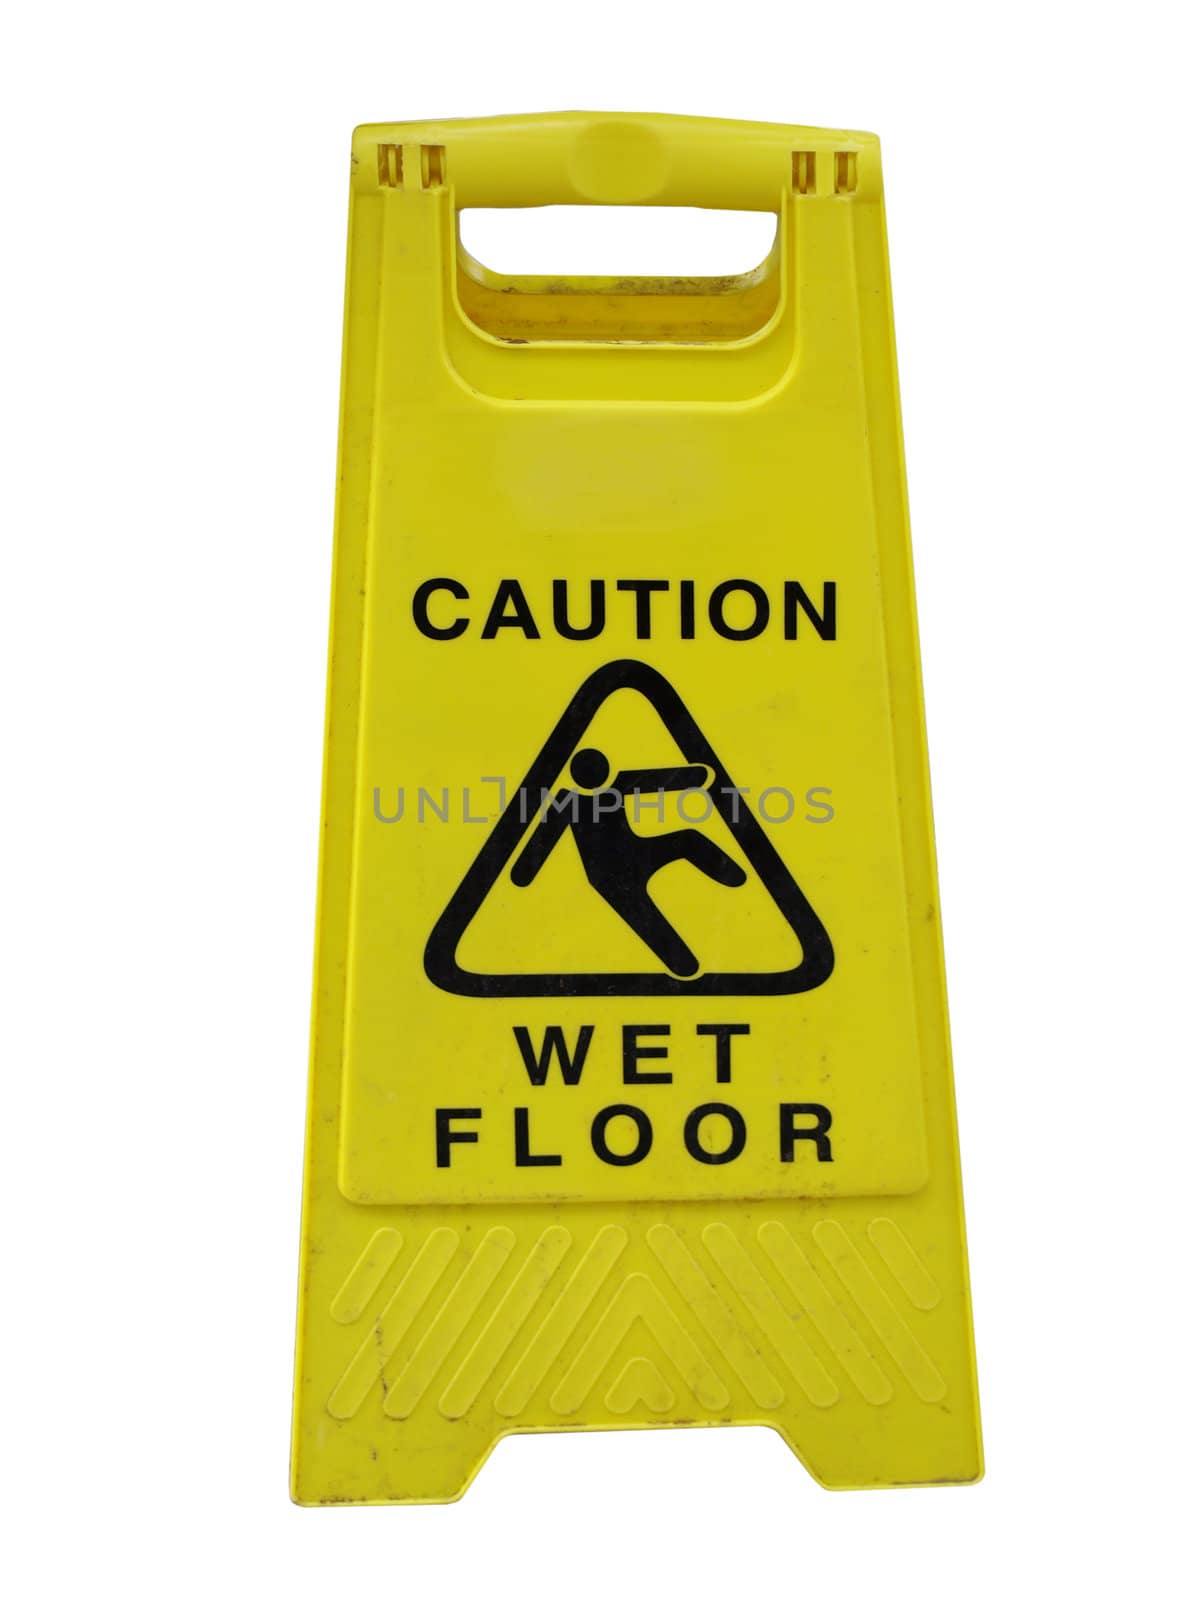 Caution wet floor sign isolated on white